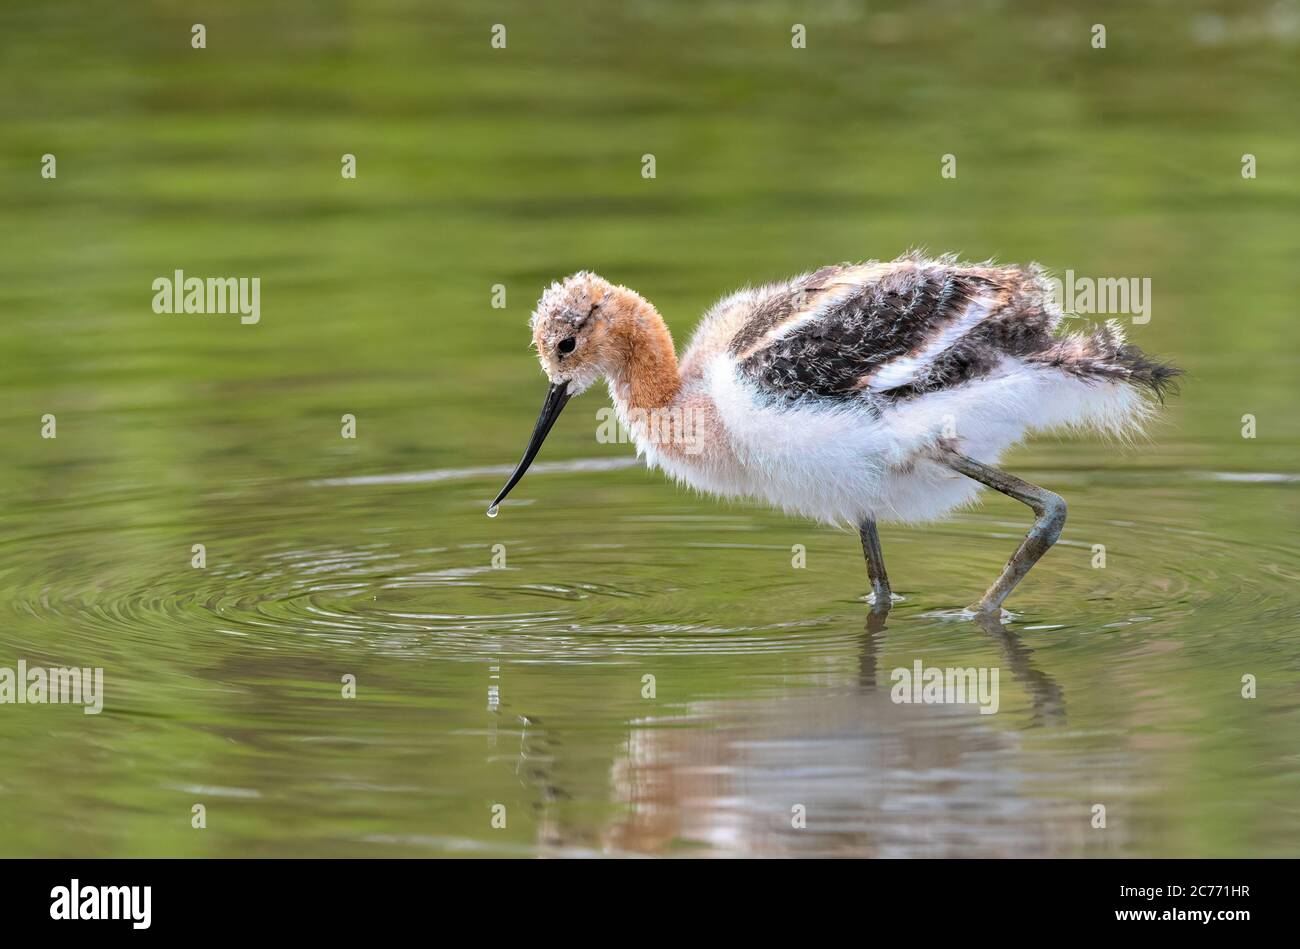 An American Avocet chick in downy feathers, wades through the shallow green waters of a Wetland Environment looking for food. Stock Photo